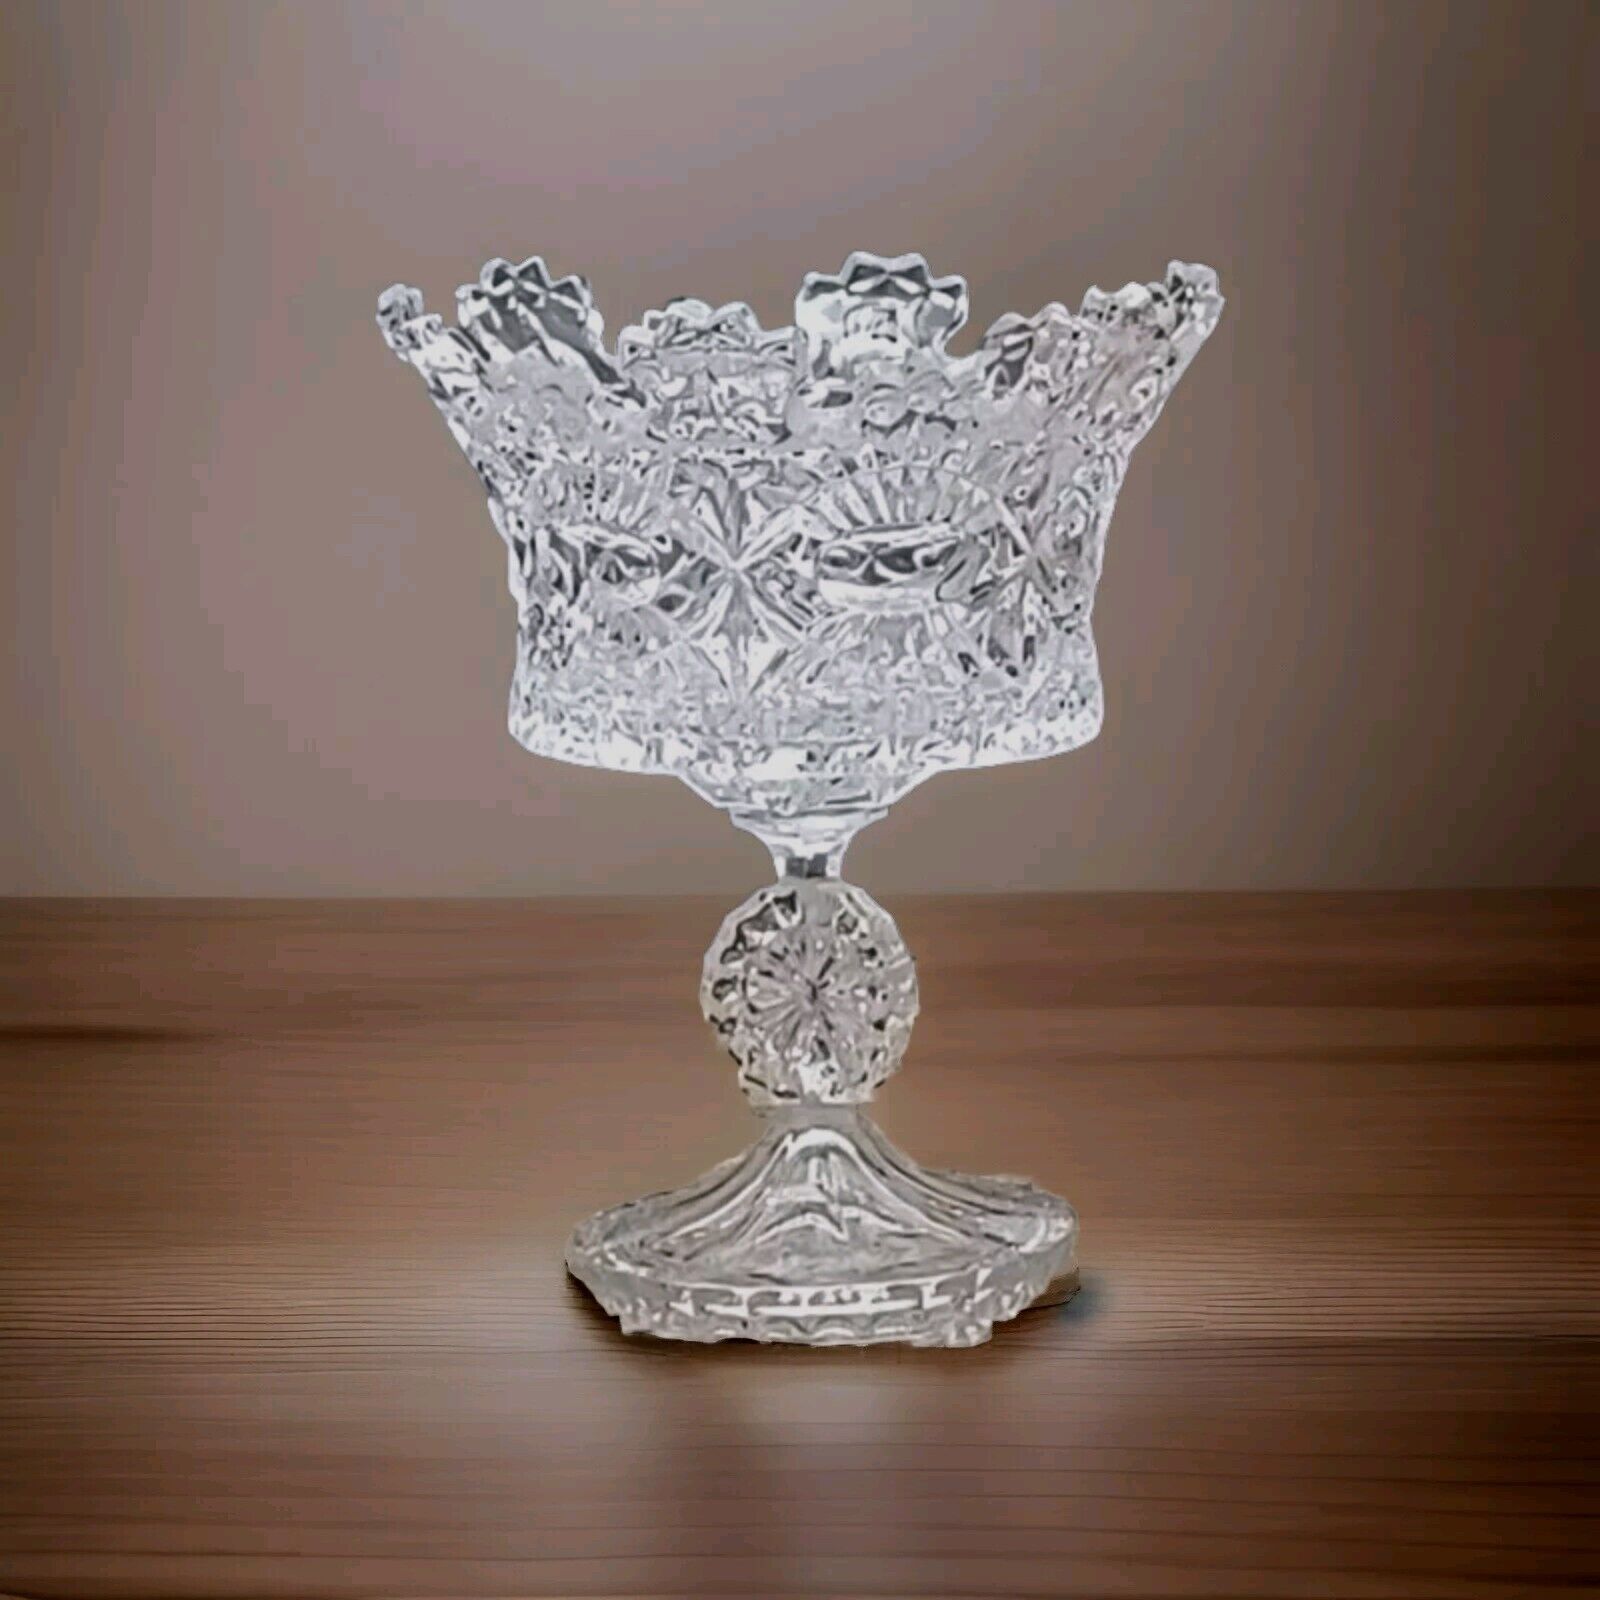 Crystal Crown Shannon/Waterford Compote Pedestal Glass Bowl 10 1/2